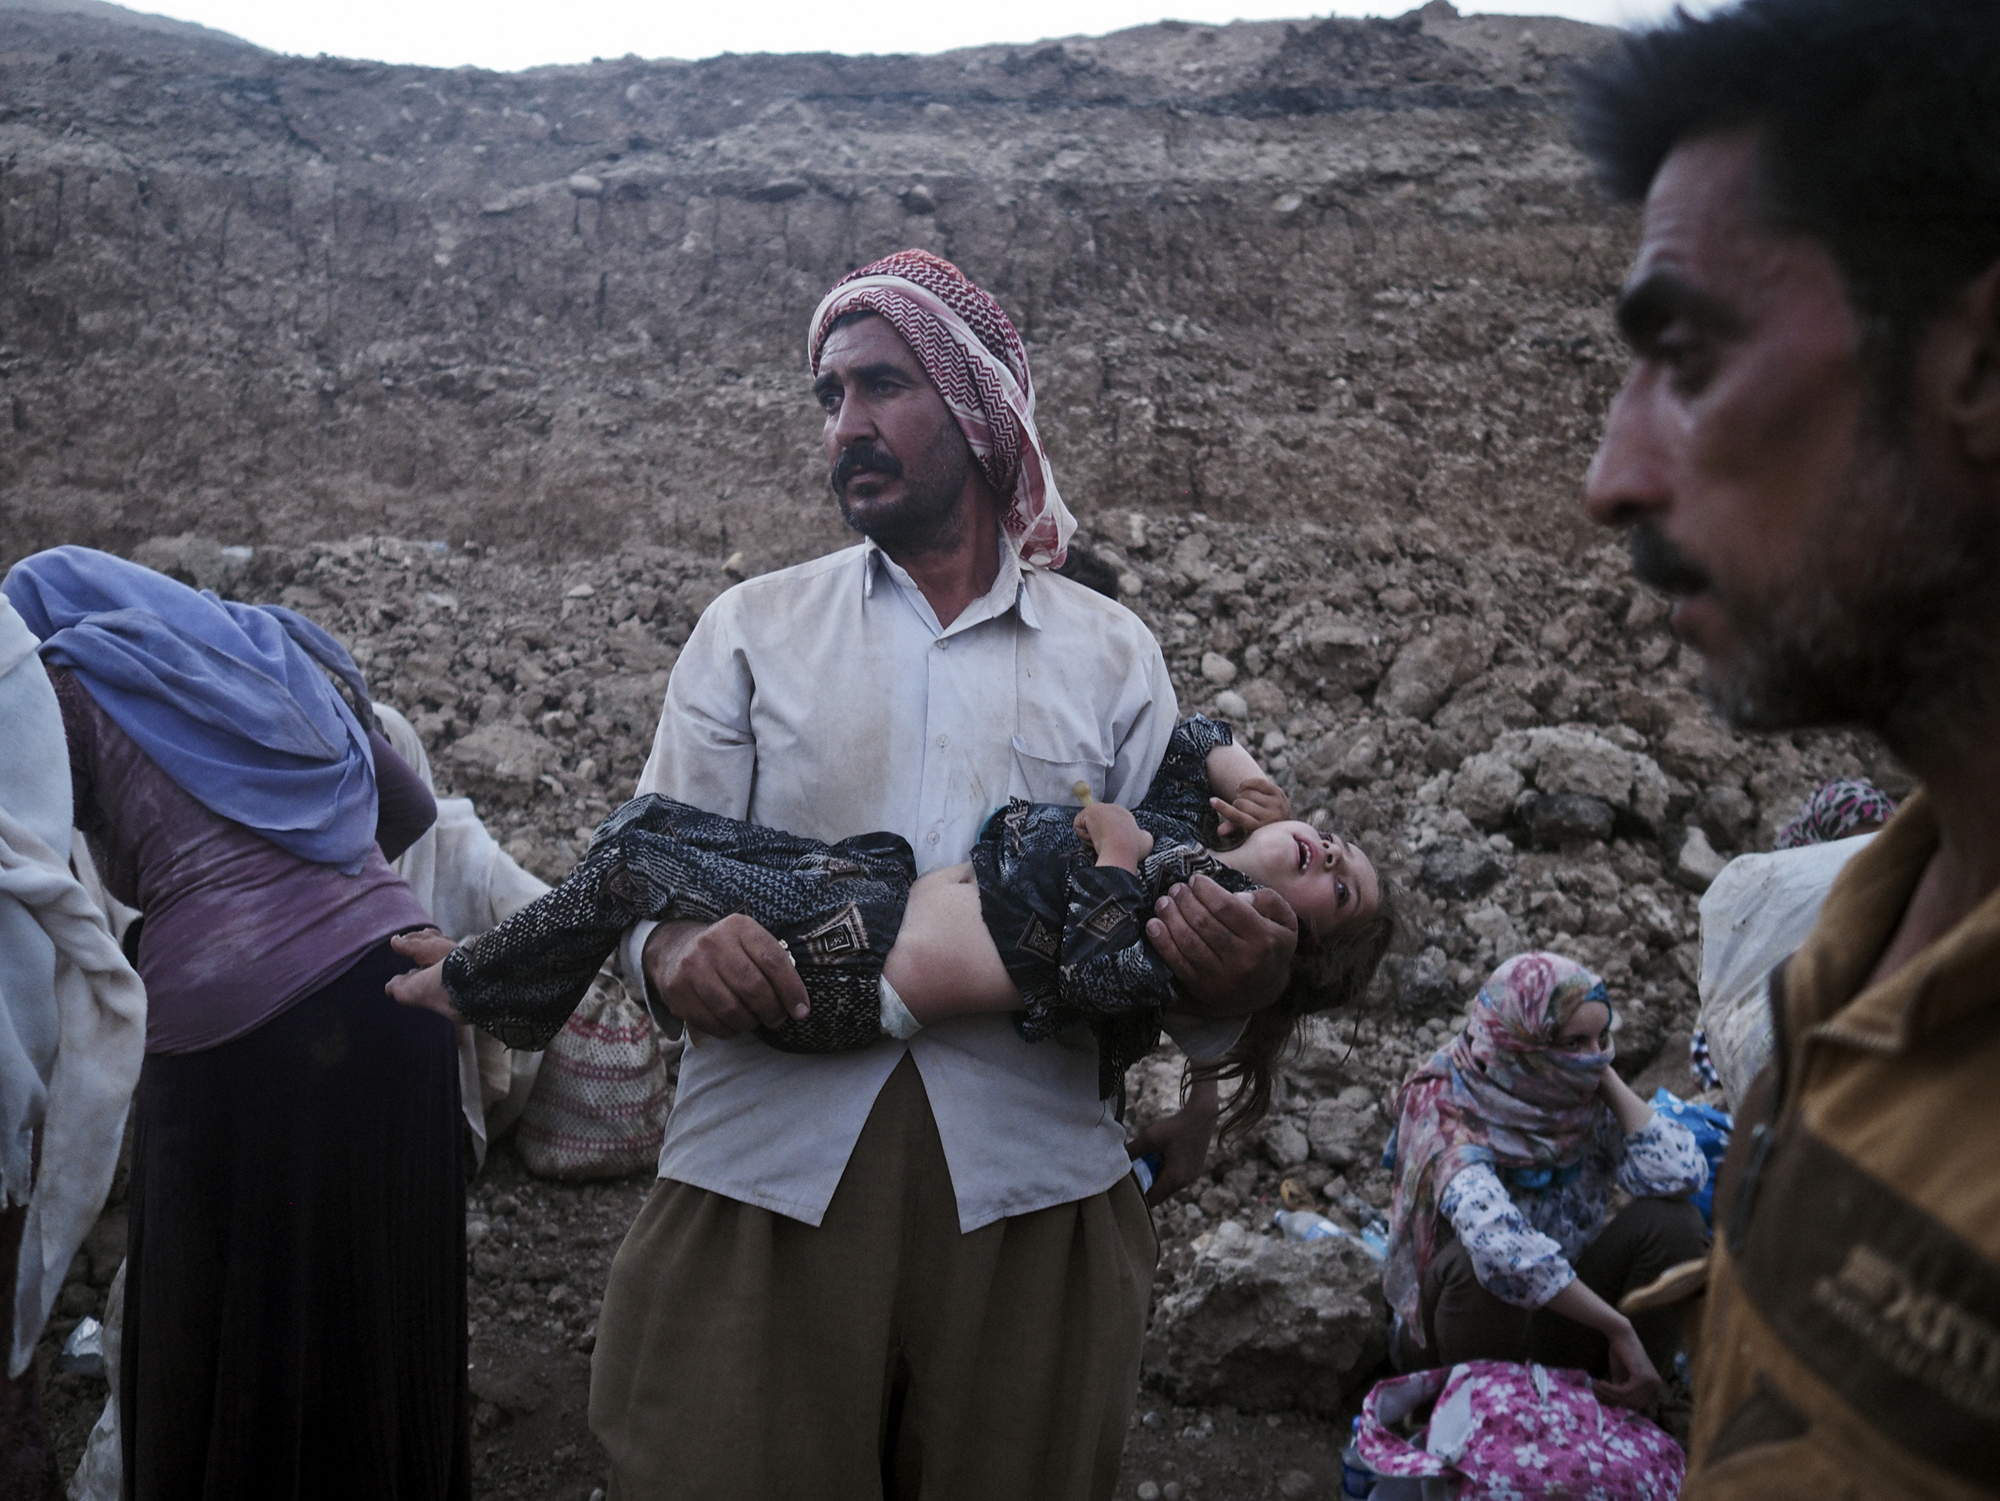 A Yazidi family from Sinjar arrive at the Fishkhabur border crossing between Iraq's Dohuk Province and Syria, Aug. 10, 2014. (Moises Saman—Magnum for TIME)